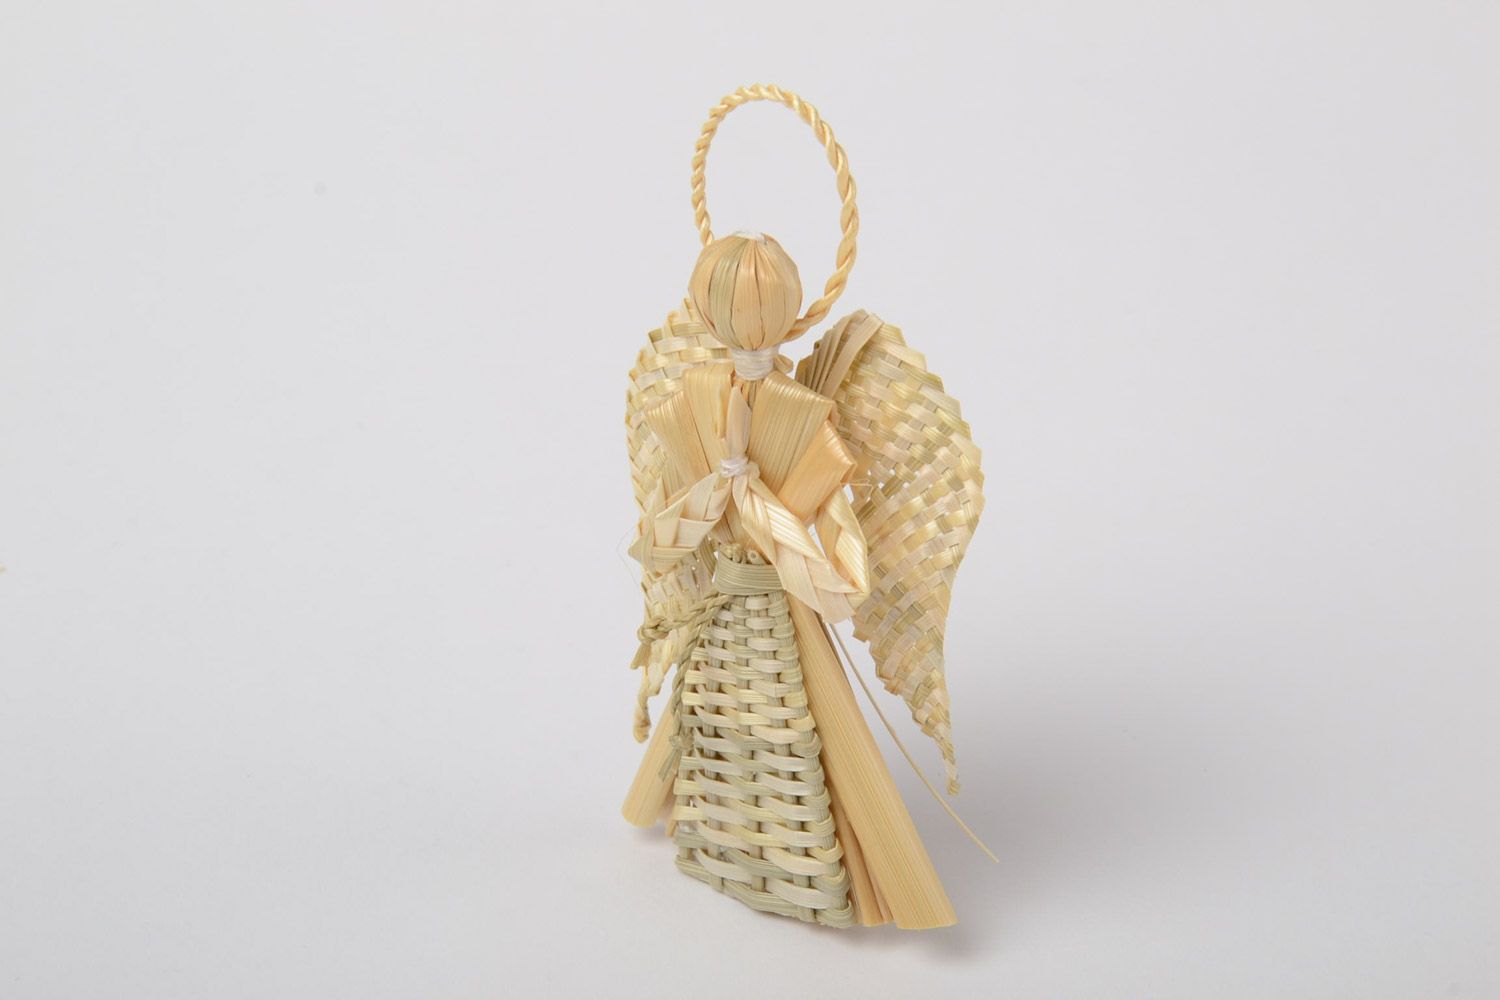 Small handmade wall hanging figurine of guardian angel woven of natural straw photo 2